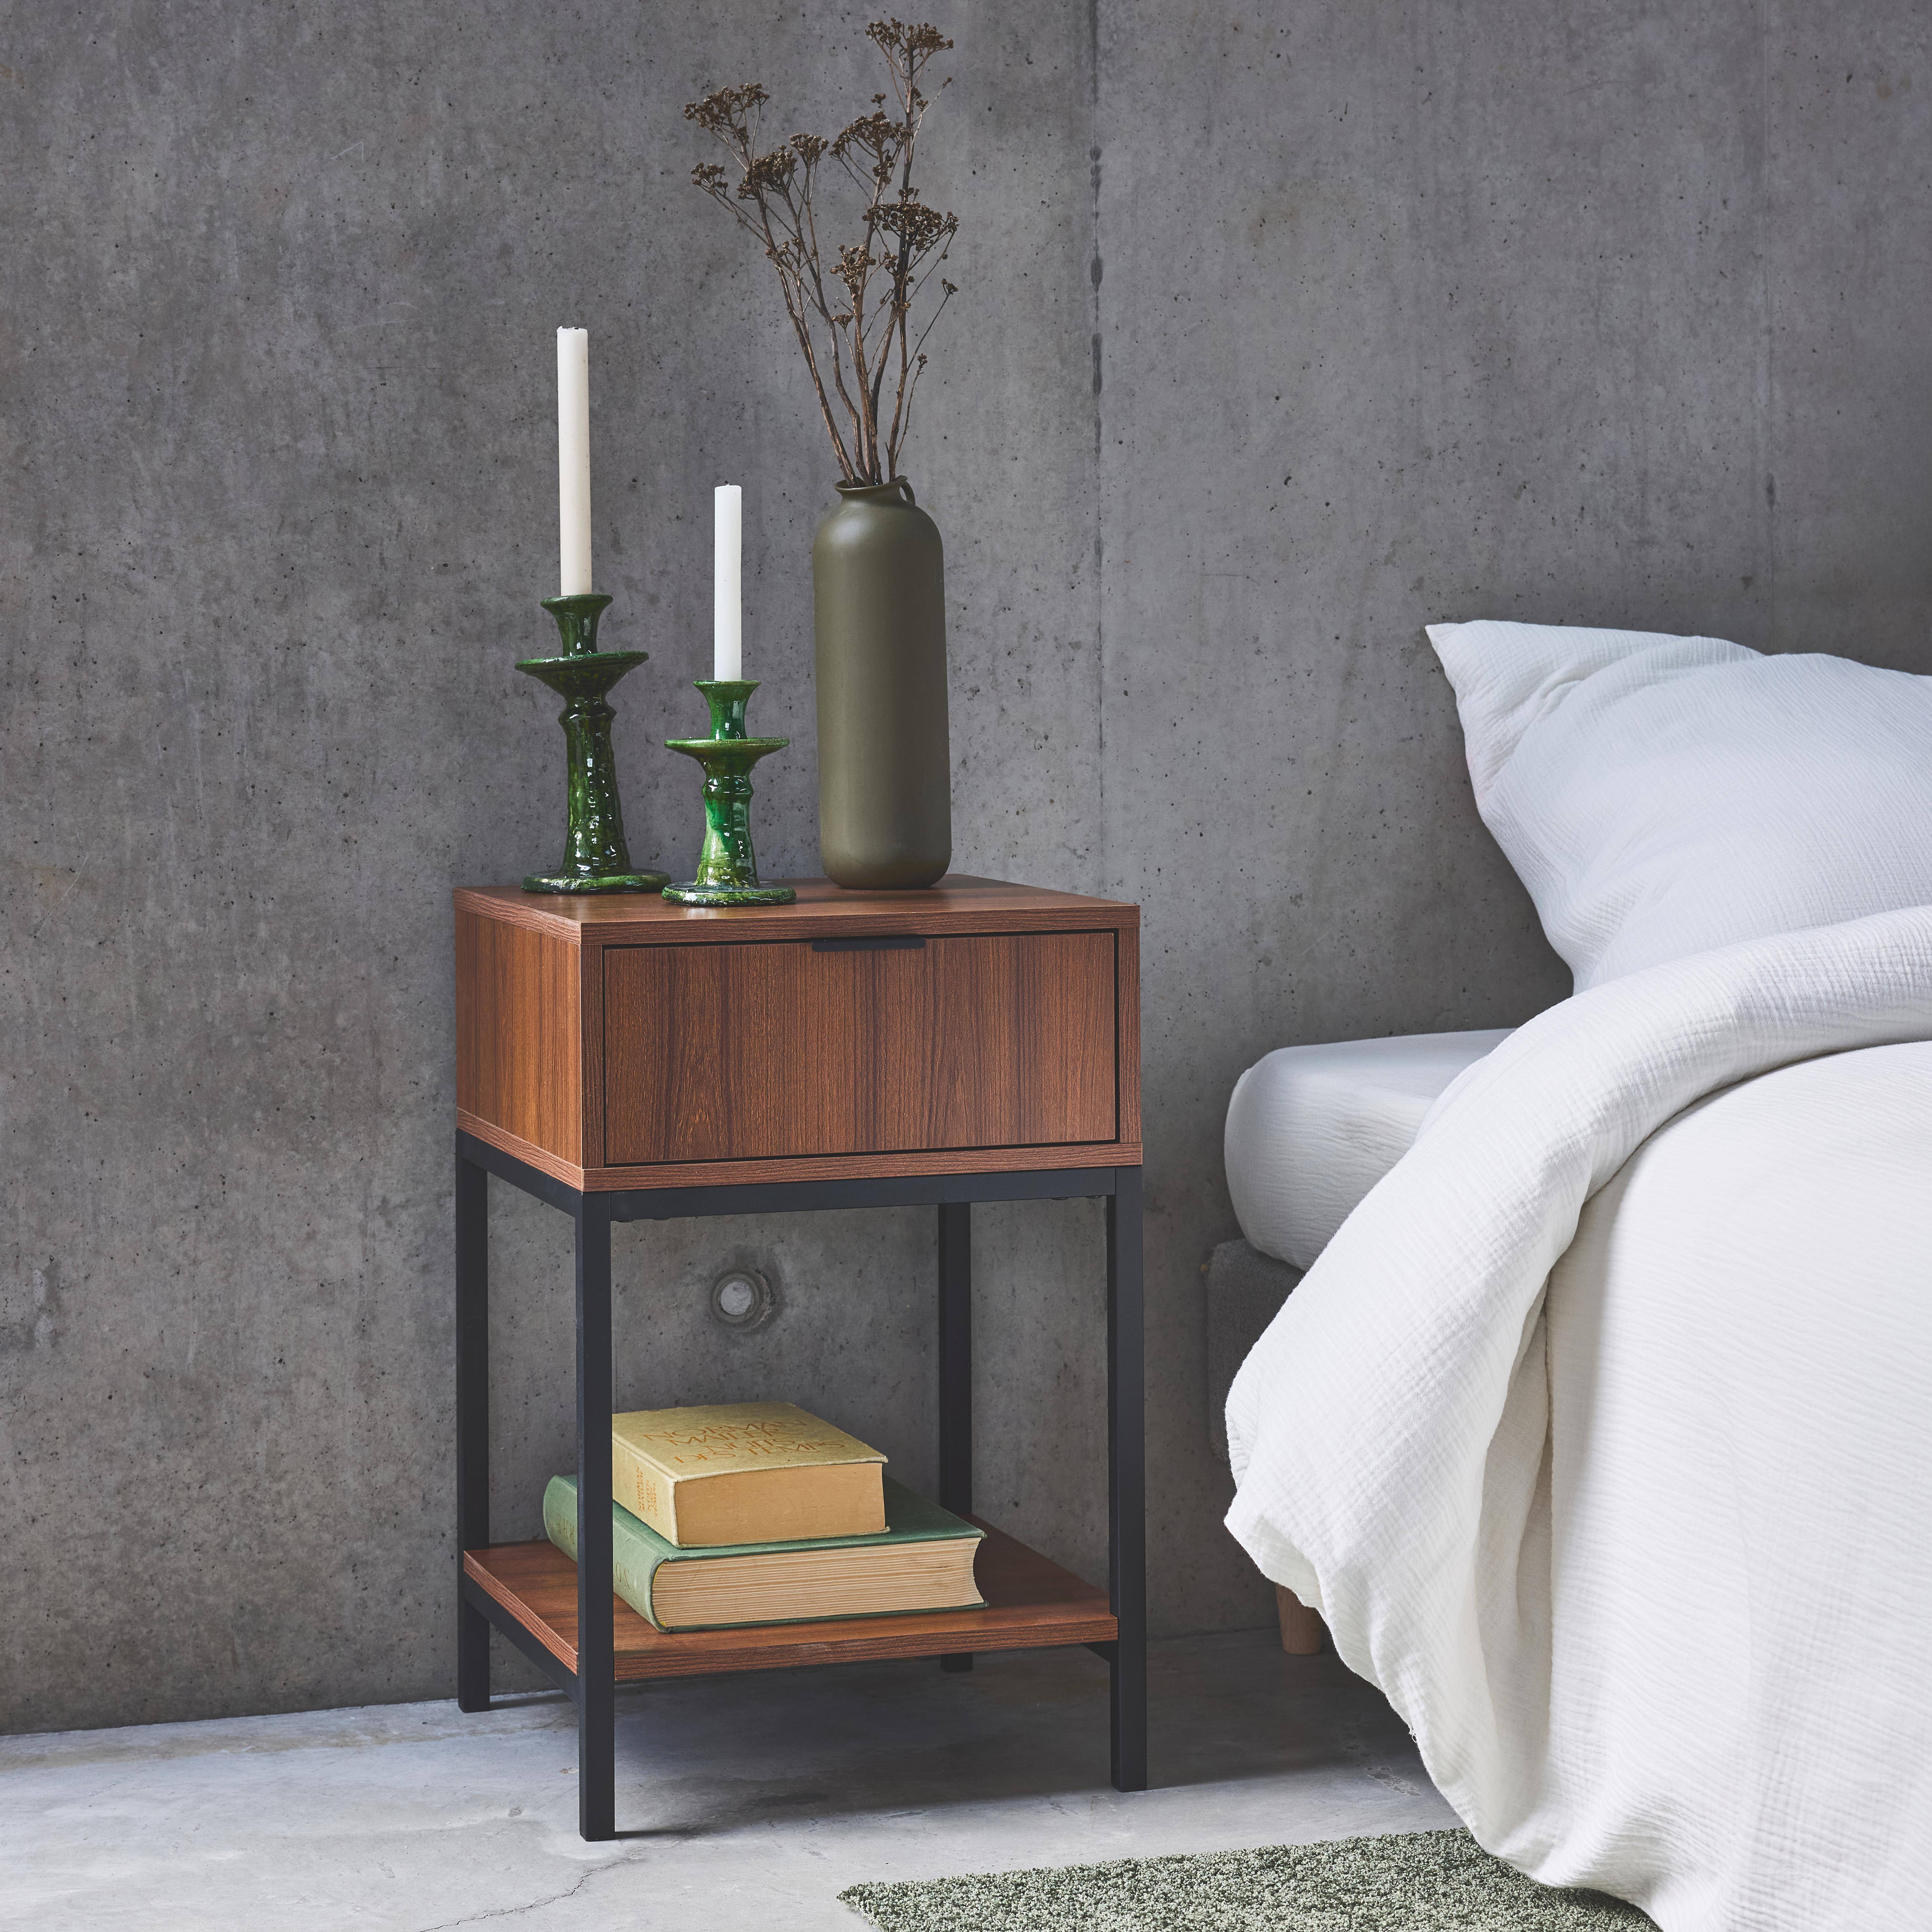 Walnut-coloured bedside table with black metal legs and handle - 1 drawer and 1 shelf,sweeek,Photo1